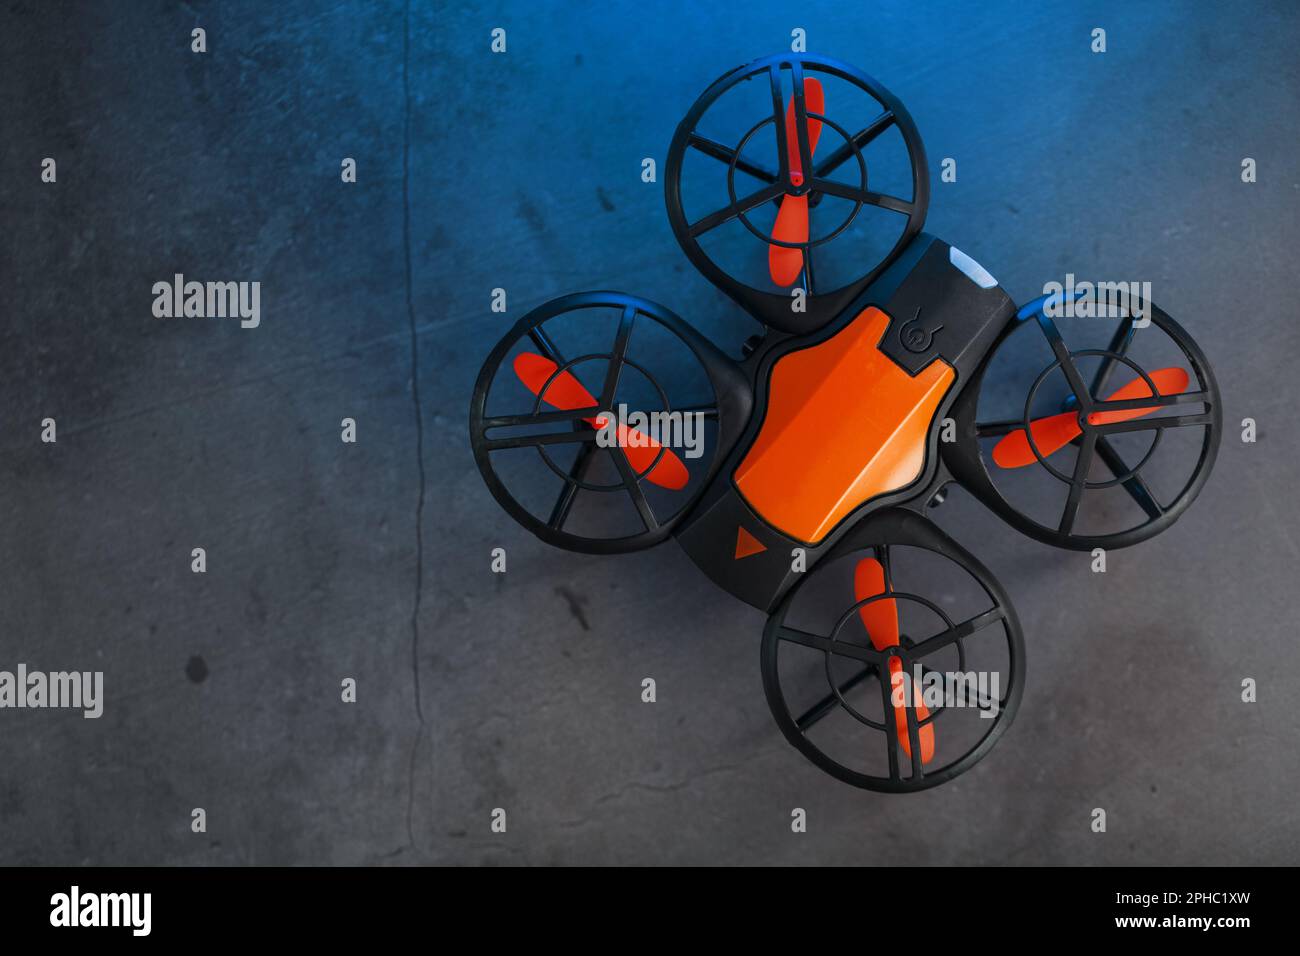 A reconnaissance quadcopter drone with an orange body and blue LED backlight on a dark background Stock Photo